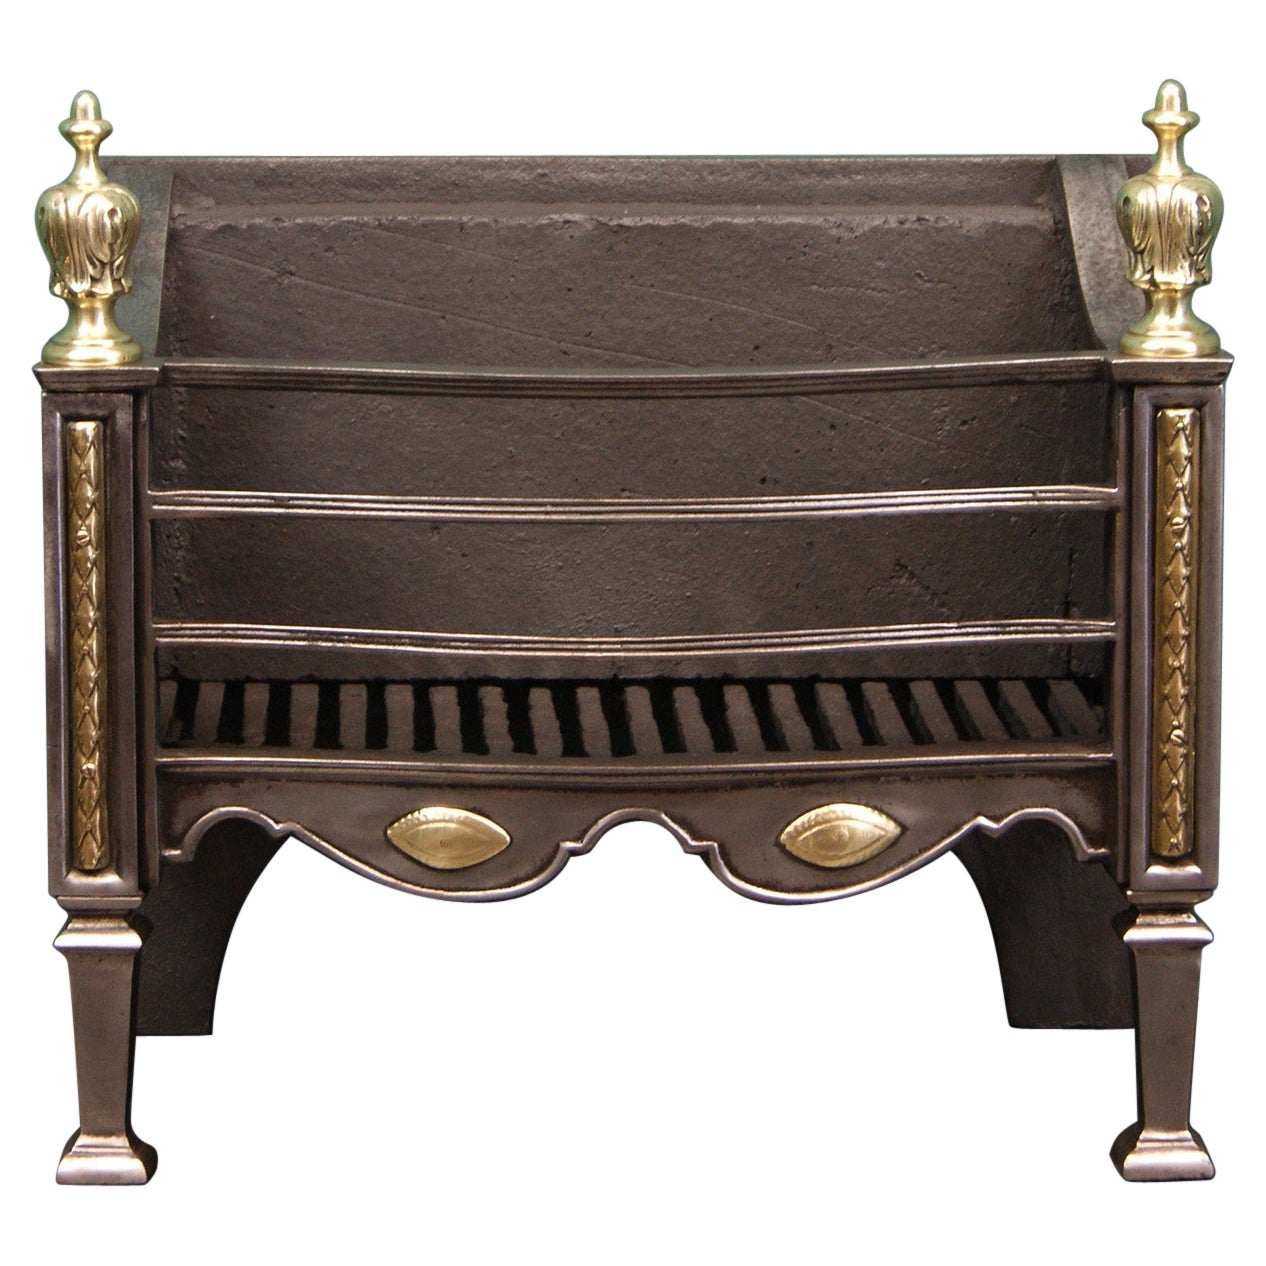 A Small Polished Brass & Steel Fire Basket by Thomas Elsley